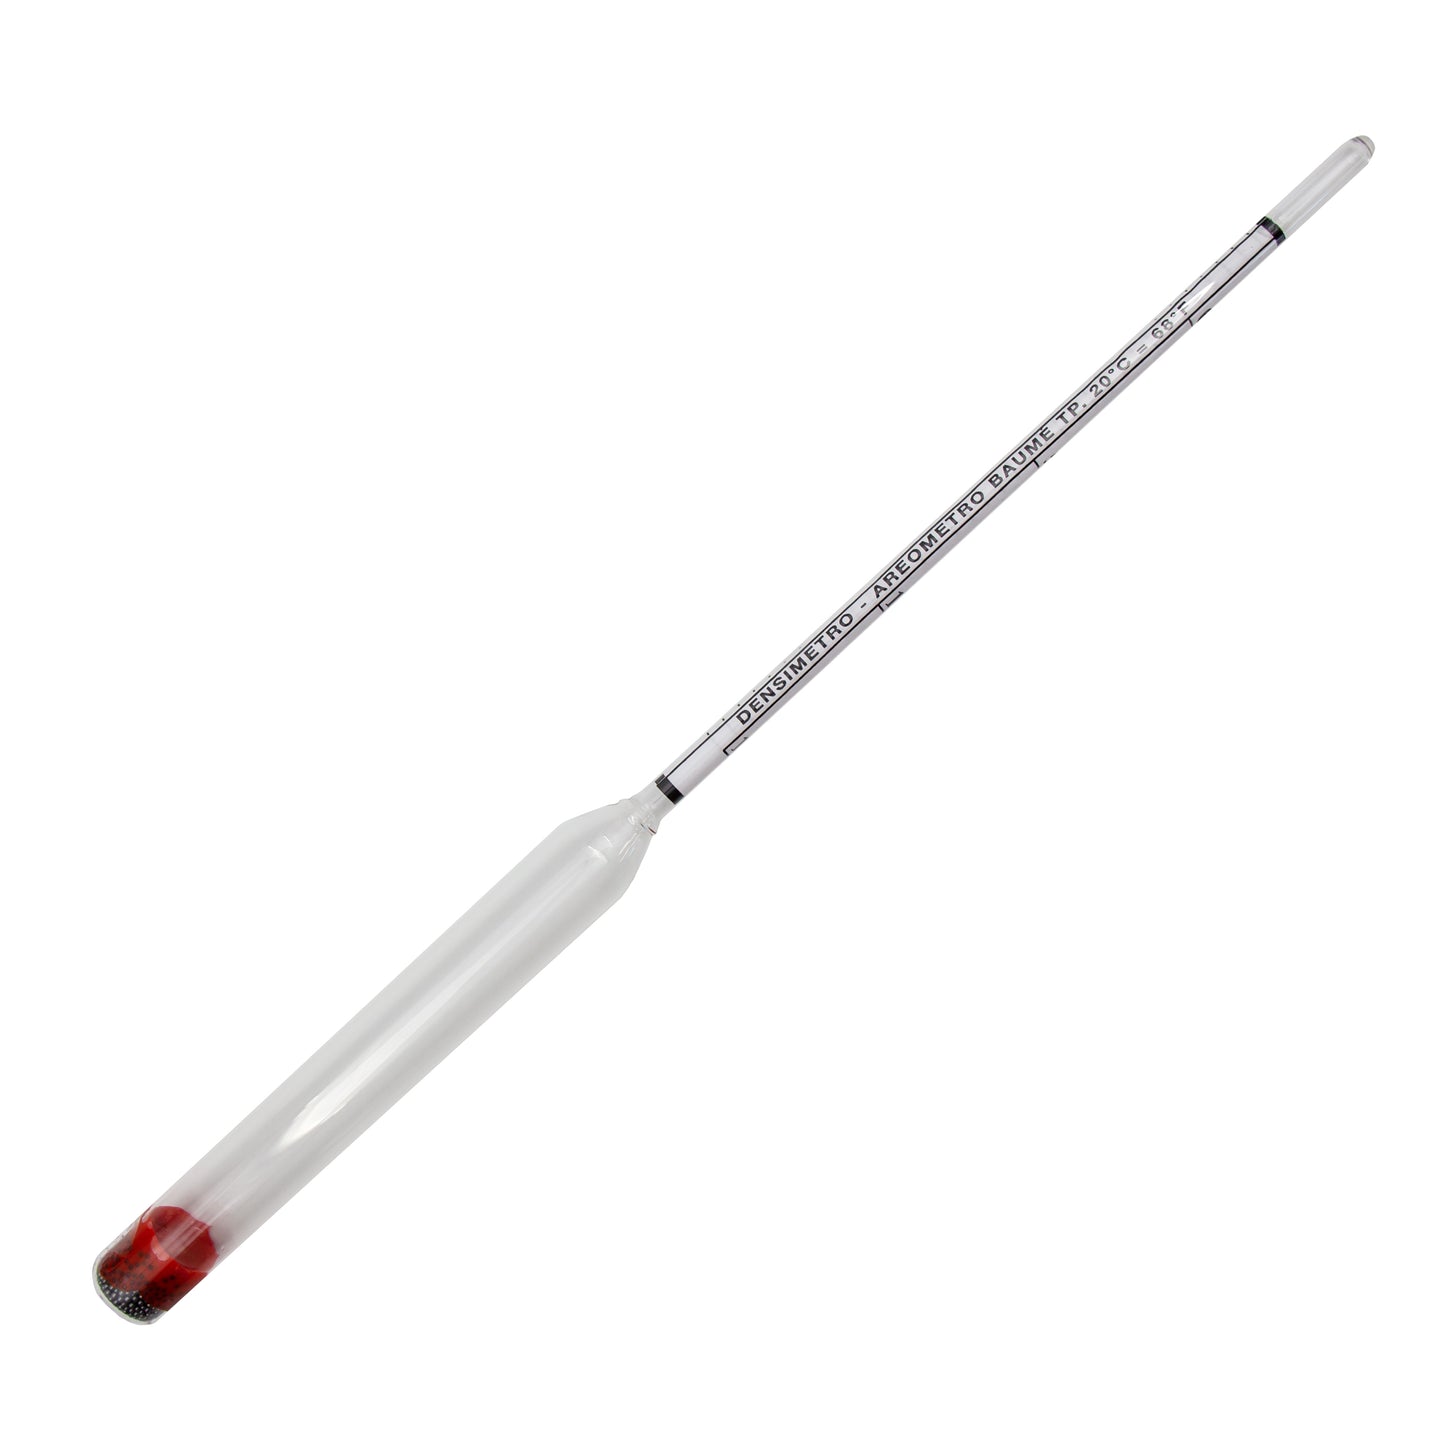 Hydrometer -2 to 15 Baume